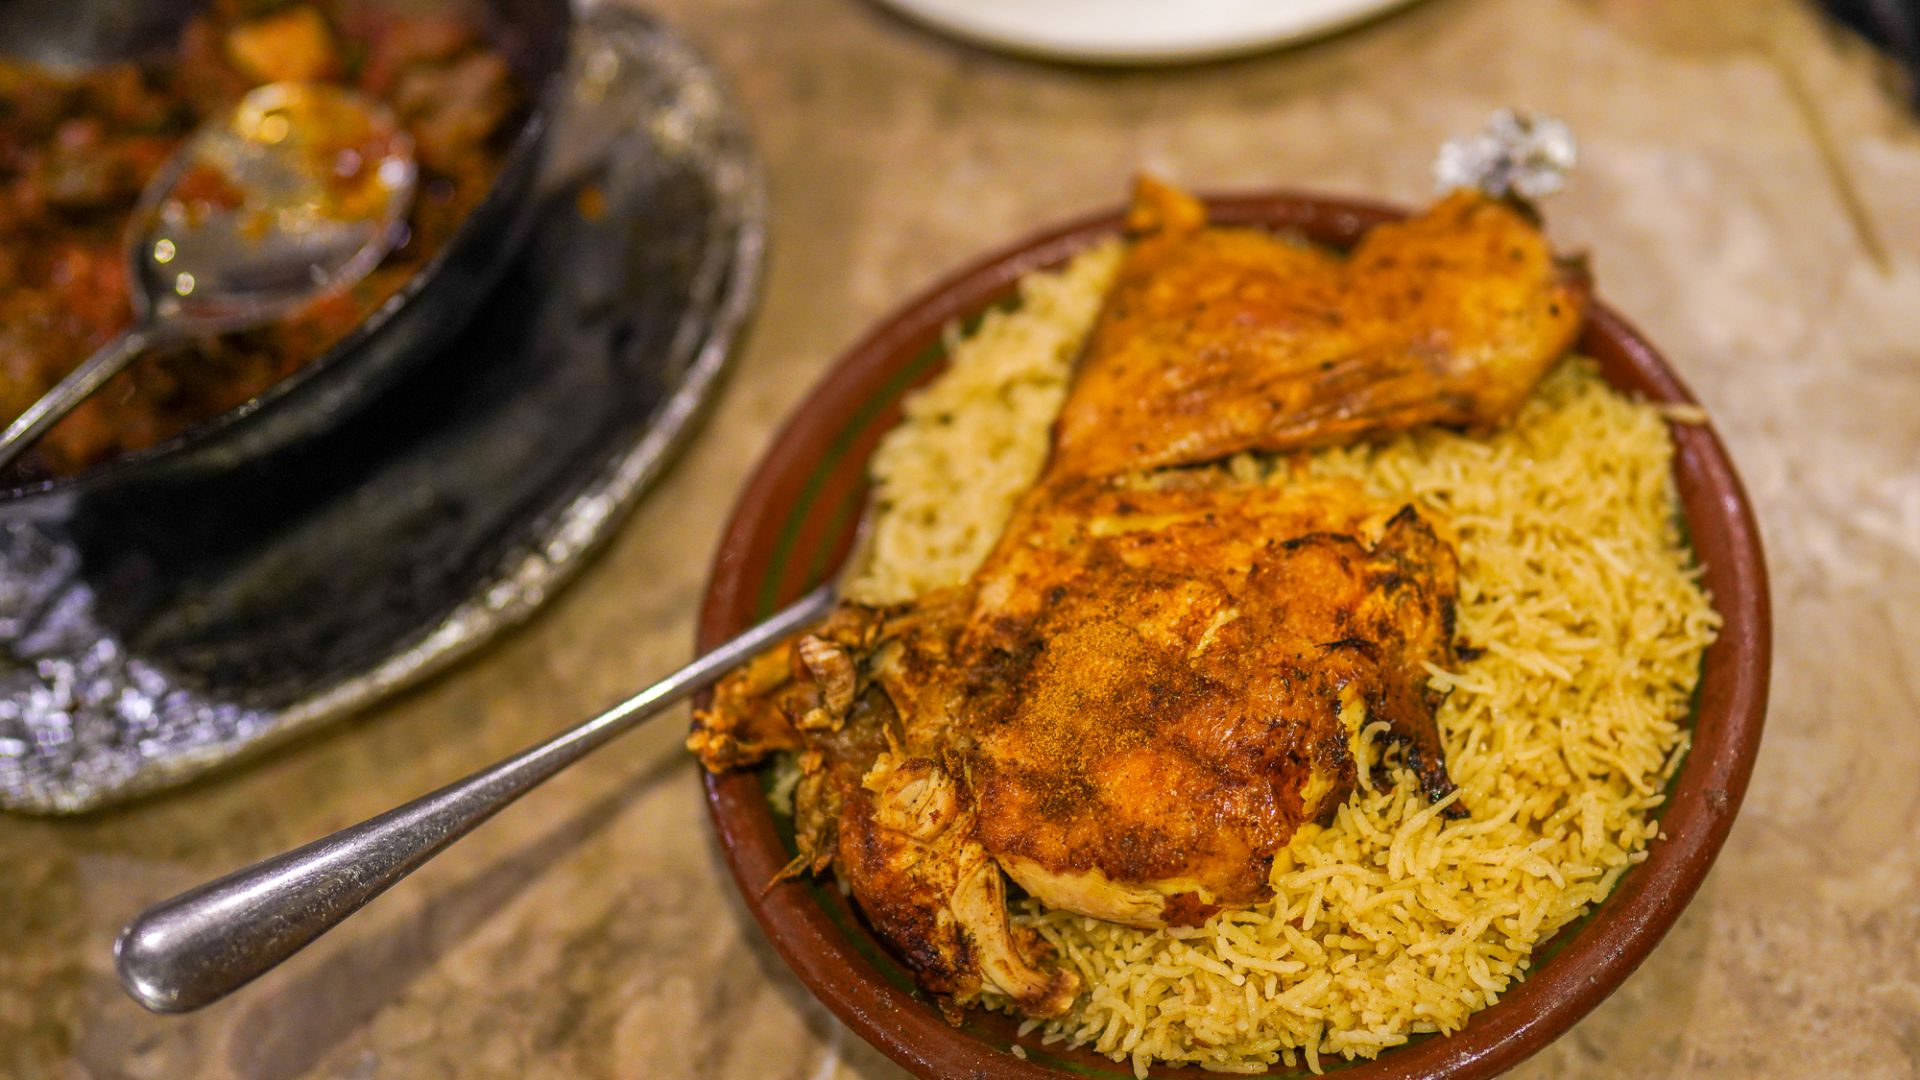 A clay bowl of spiced rice with half a grilled chicken sajji on top